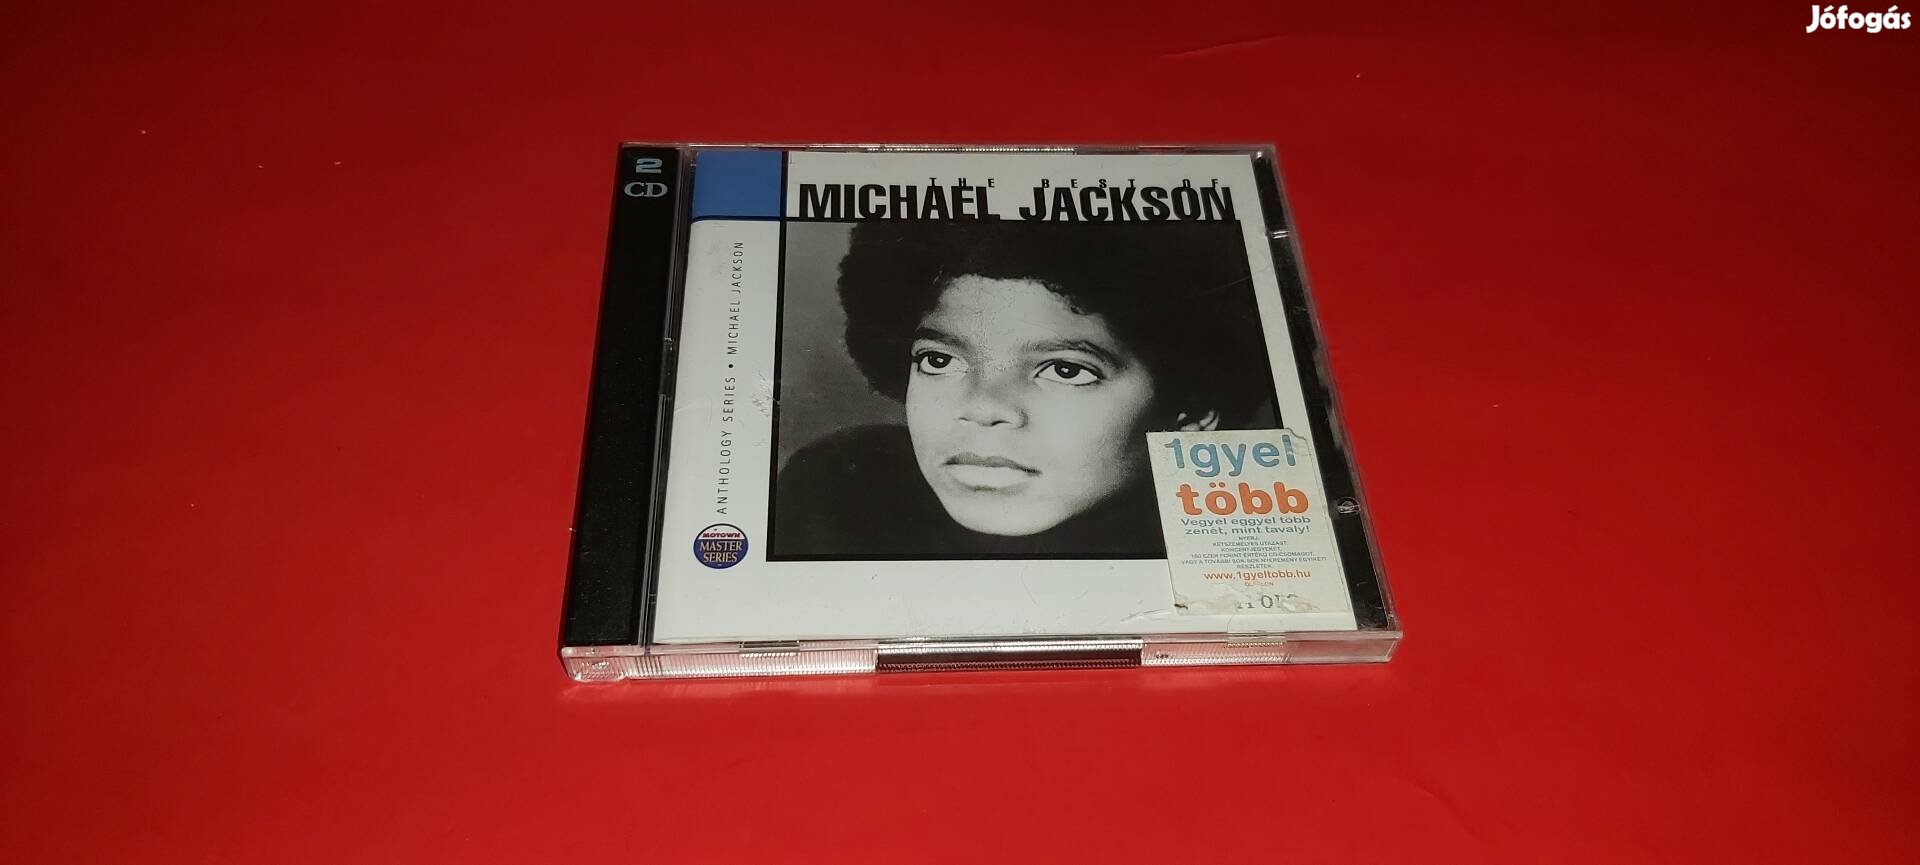 Michael Jackson The best of anthology series dupla Cd 1995